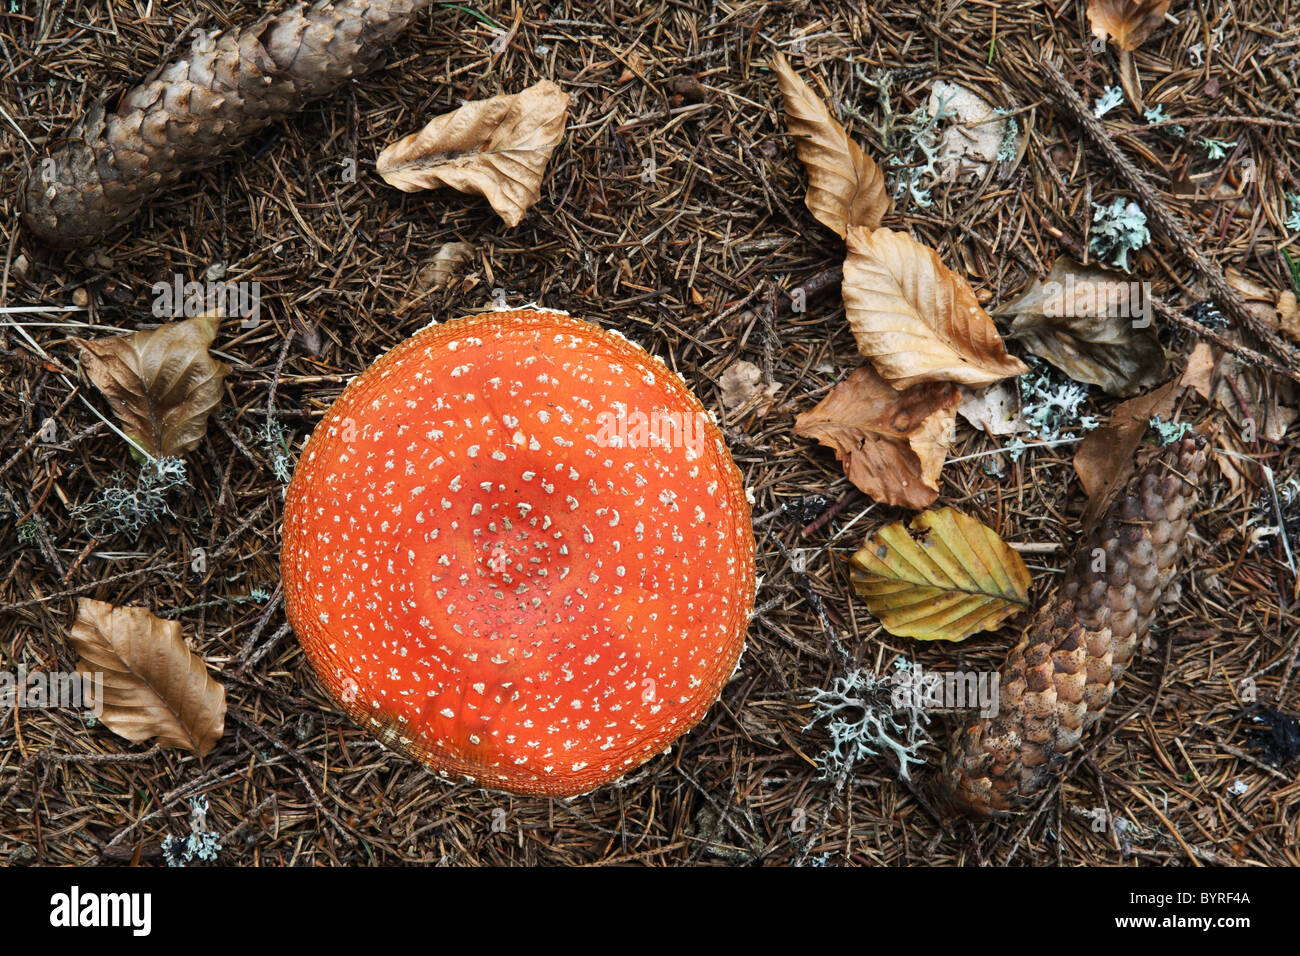 A composition of various elements from a forest: mushroom, spruce cones, leaves, lichen and moss Stock Photo